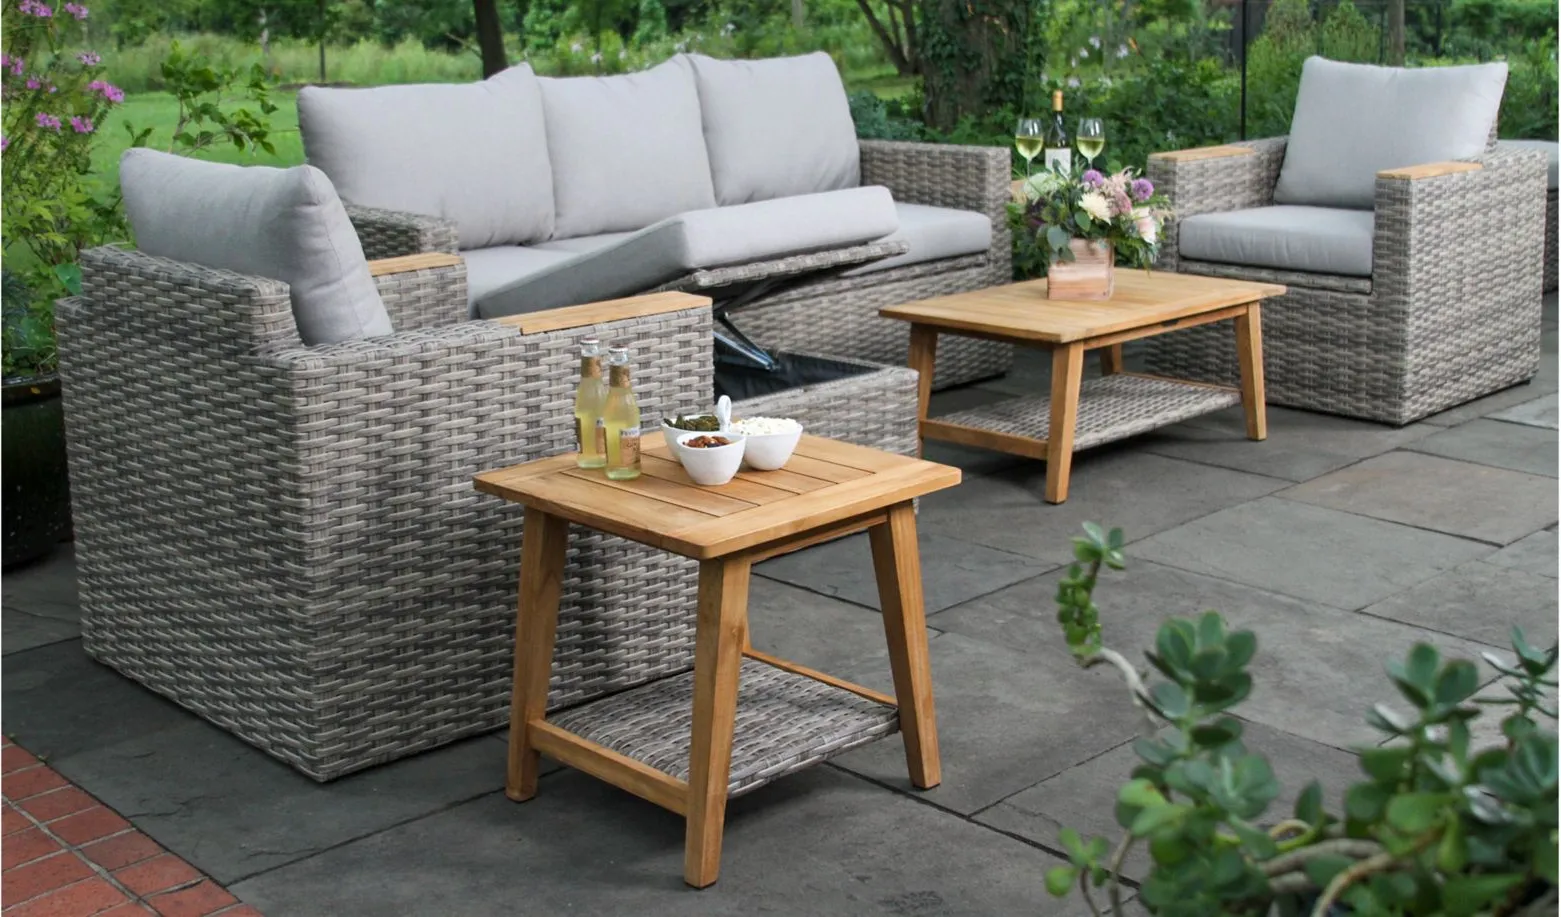 Teak and Wicker 6-pc. Patio Set in Gray by Outdoor Interiors